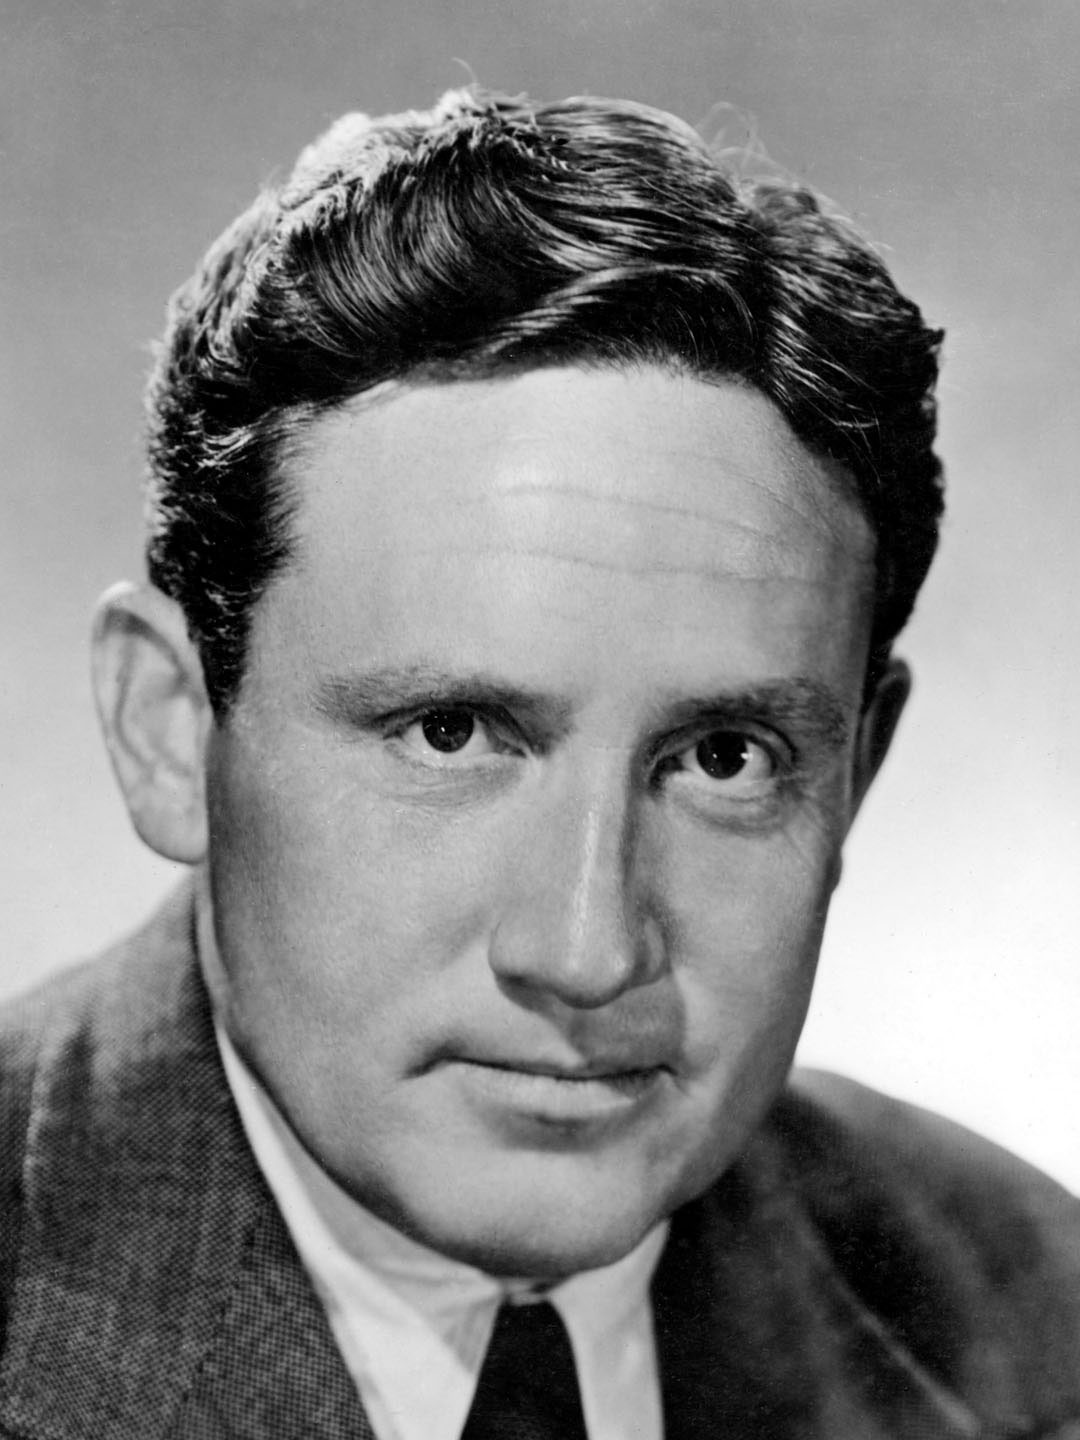 How tall is Spencer Tracy?